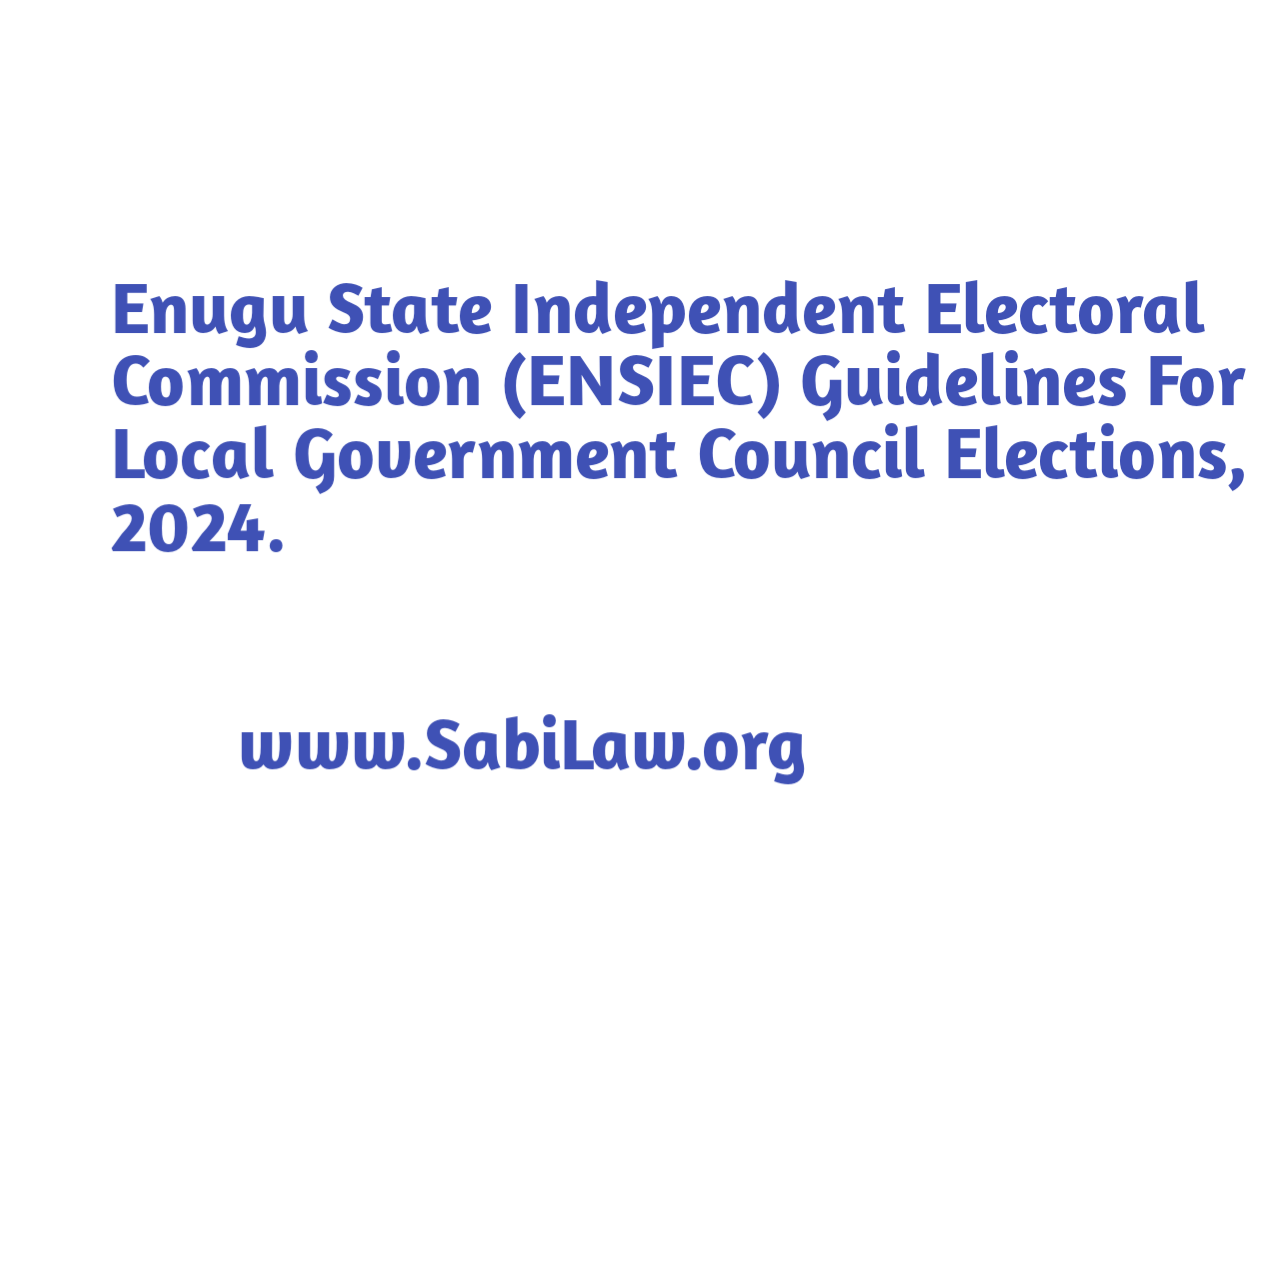 Click to download the Enugu State Independent Electoral Commission (ENSIEC) Guidelines For Local Government Council Elections, 2024